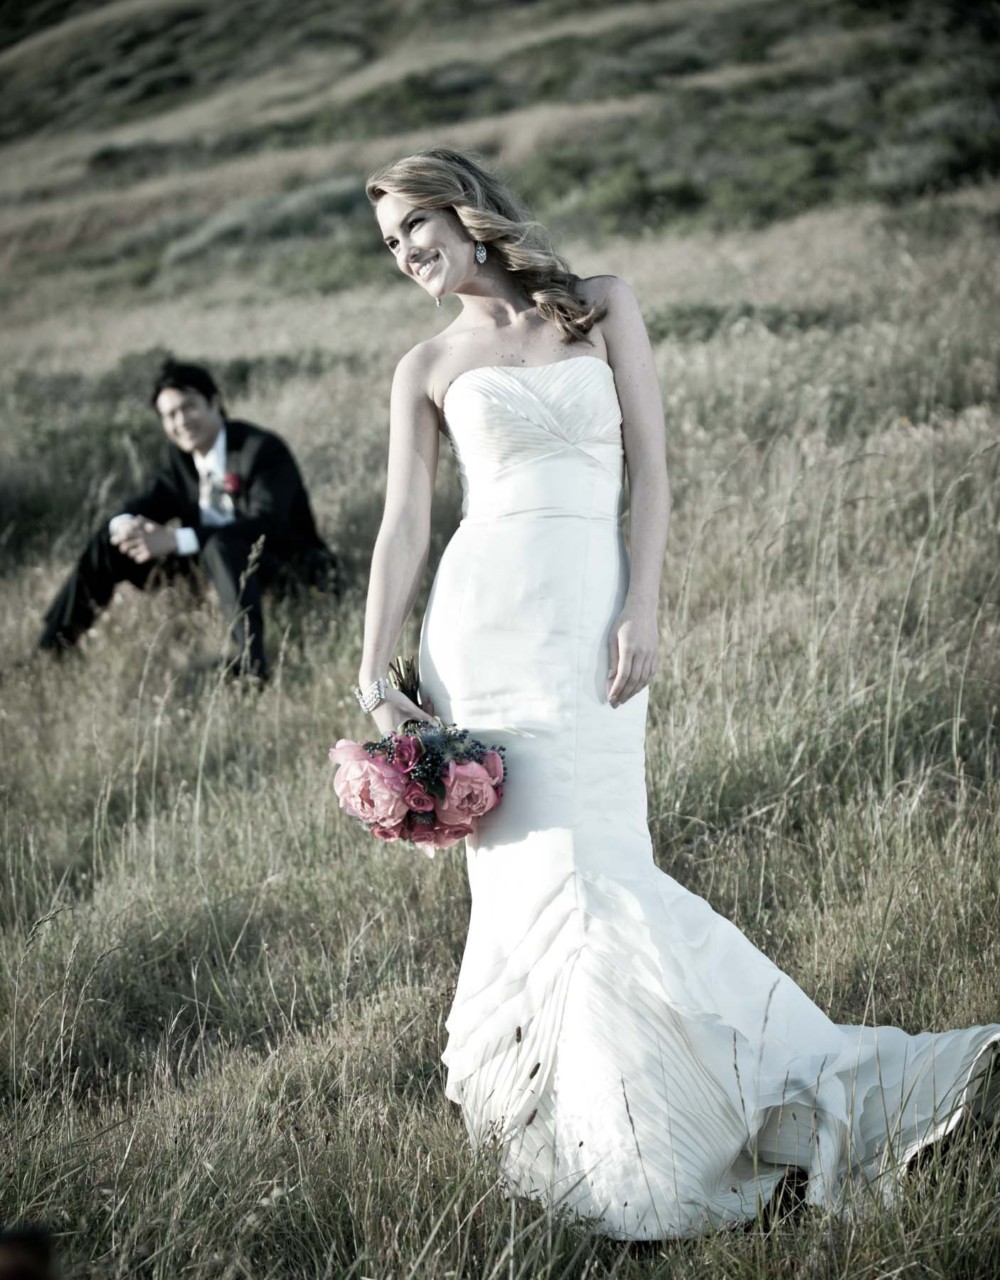 Looking for a event wedding photographer in Big Lake?